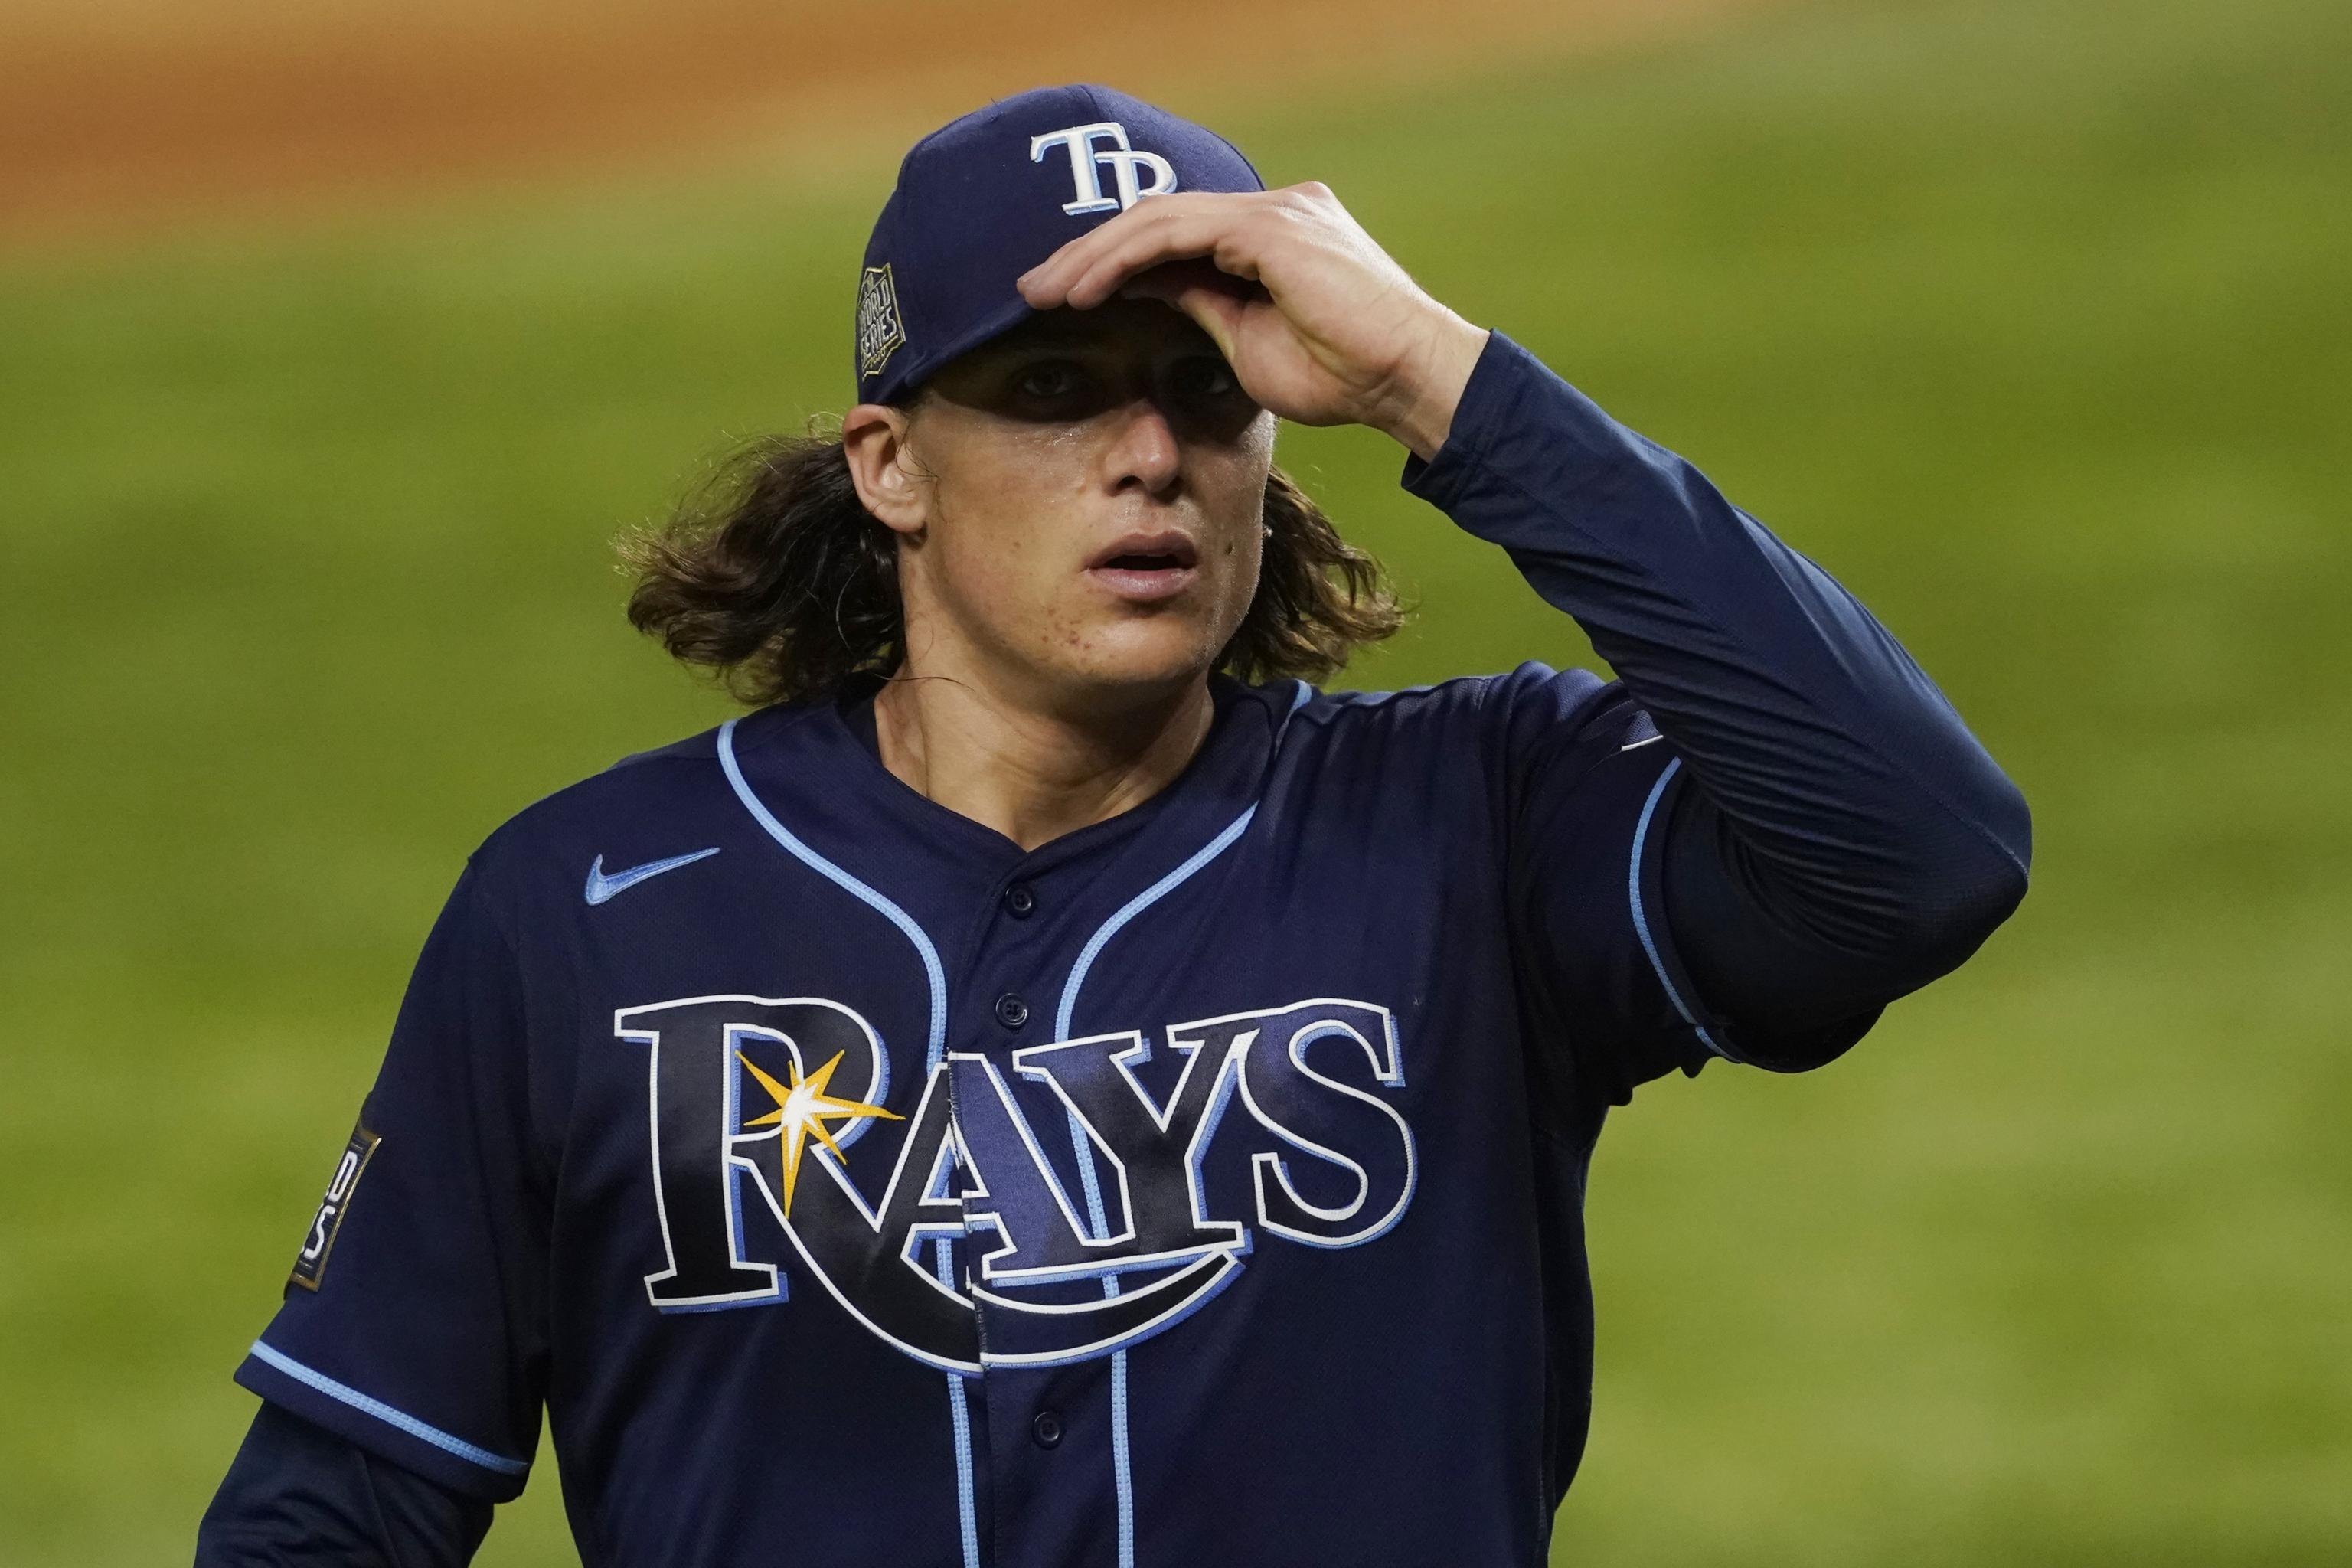 The Rays' Pitching Injuries Are Piling Up Despite Dominance